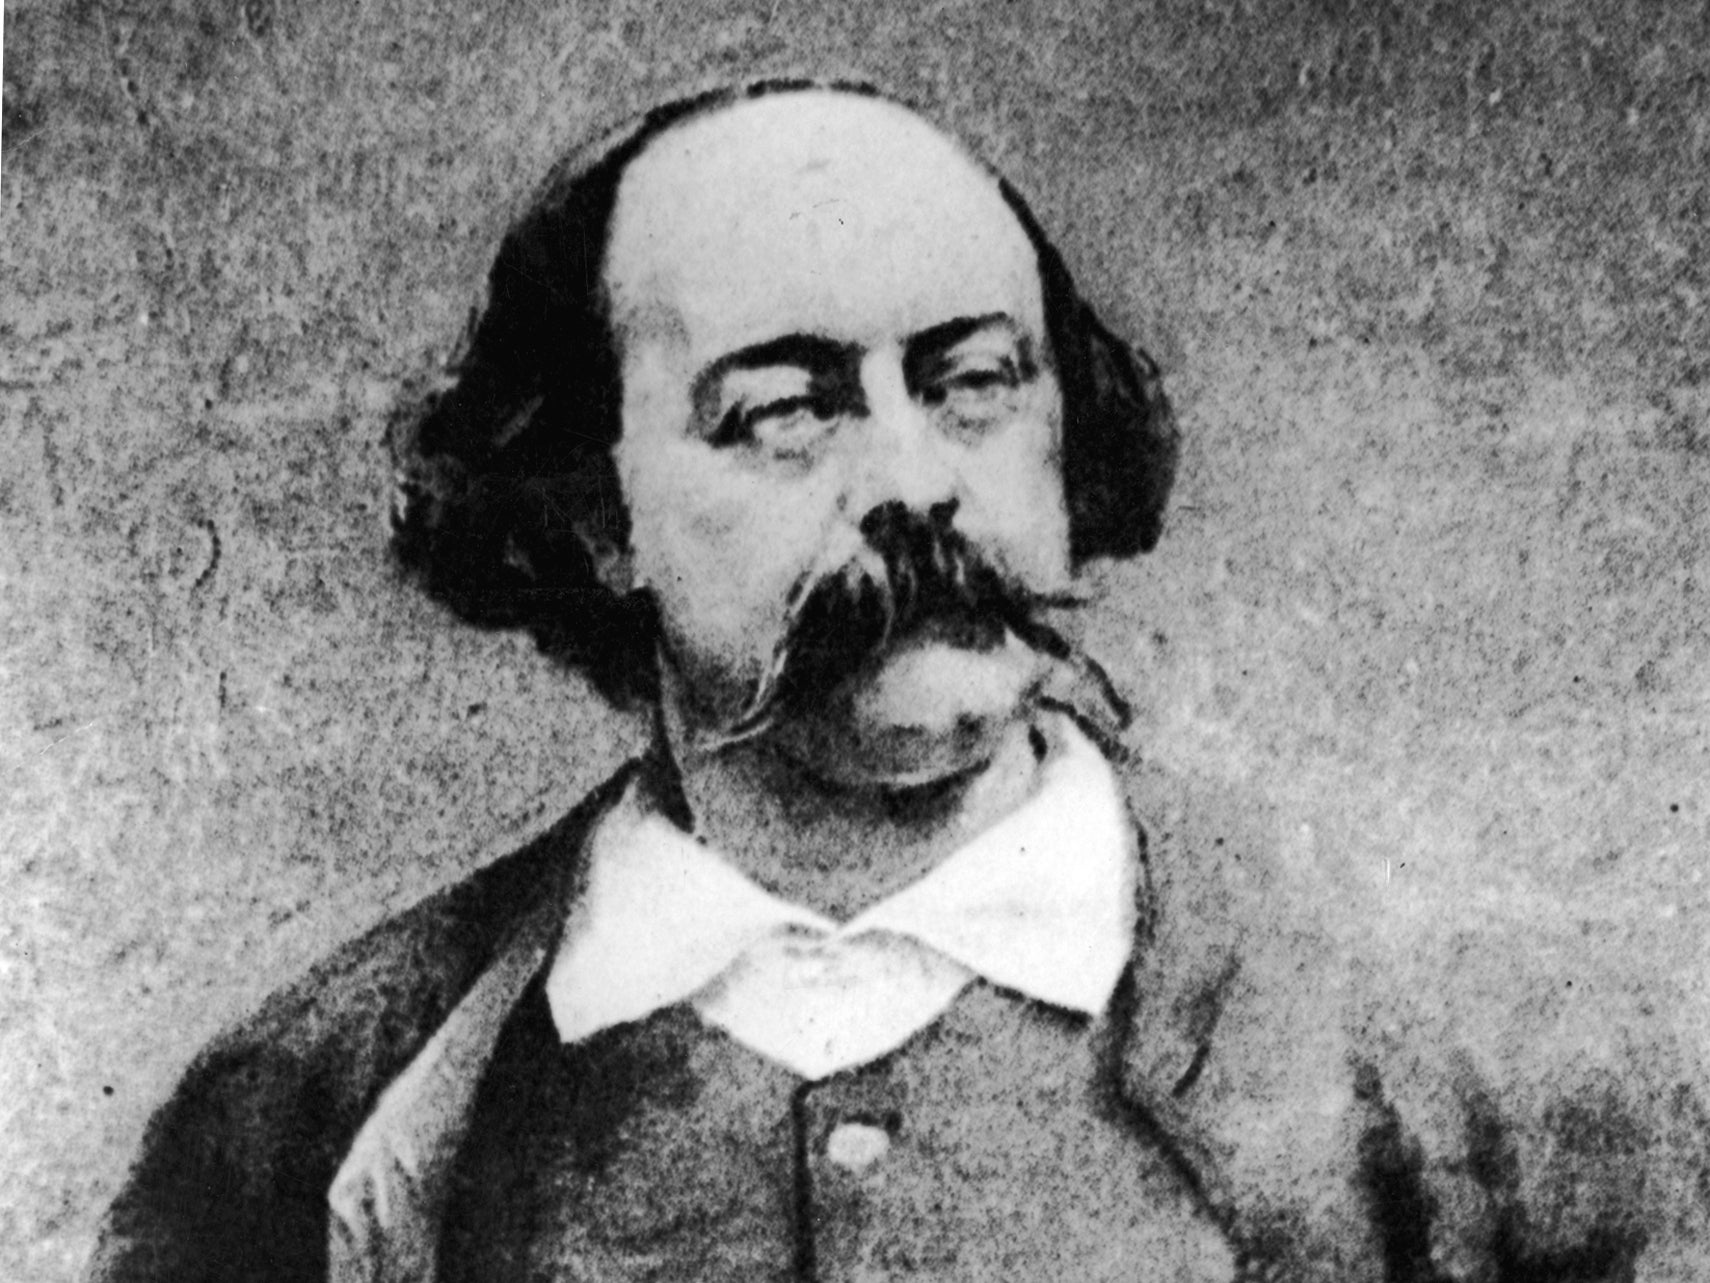 Flaubert’s letters are flecked with witticisms